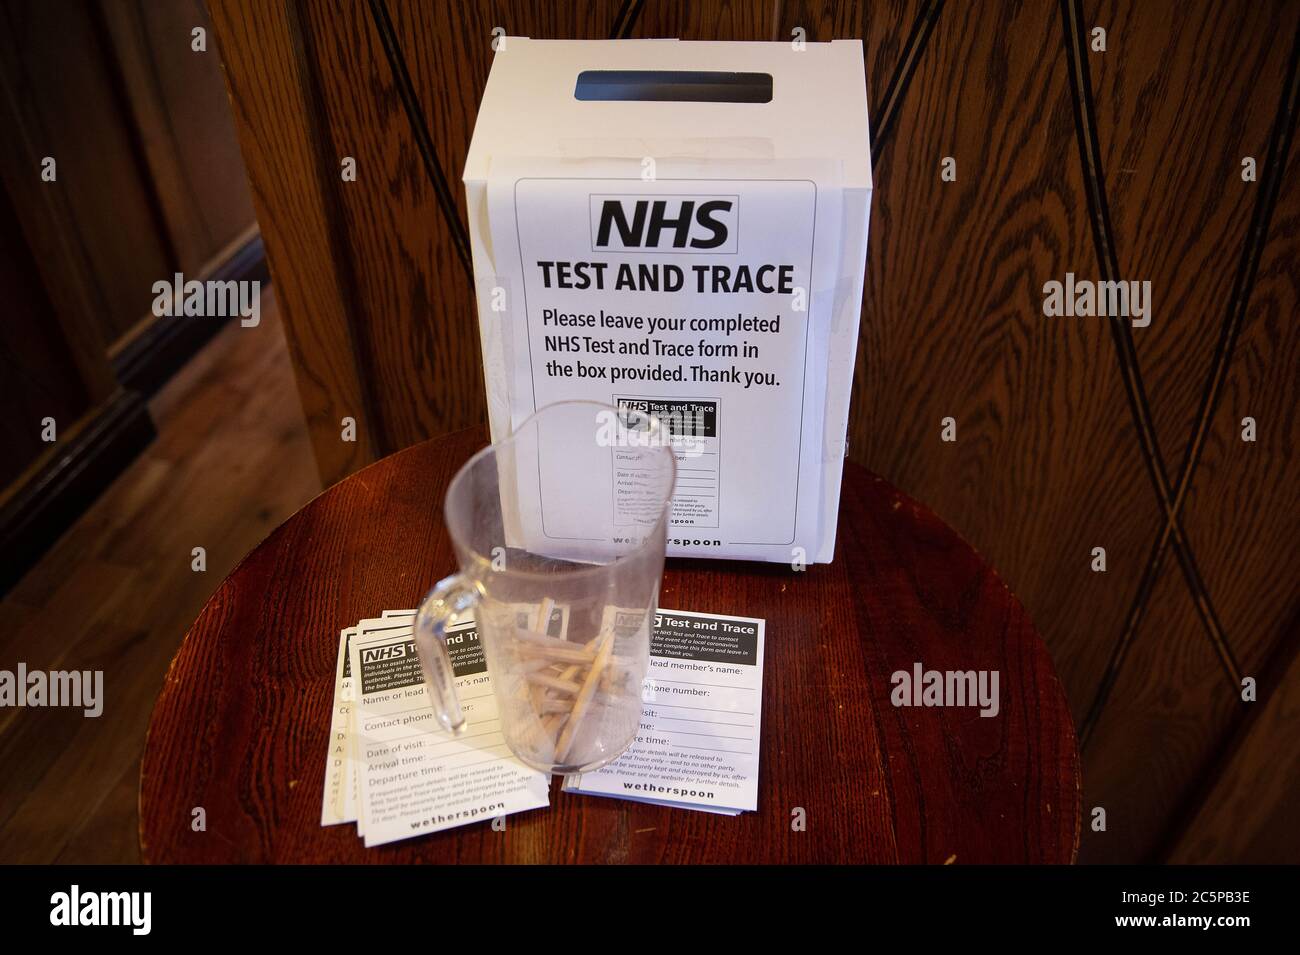 Windsor, Berkshire, UK. 4th July, 2020. NHS Test and Trace forms for people to fill in before they leave the Wetherspoon King and Castle pub in Windsor, Berkshire. Today the pub opened for the first time since the Coronavirus lockdown in March. Credit: Maureen McLean/Alamy Live News Stock Photo